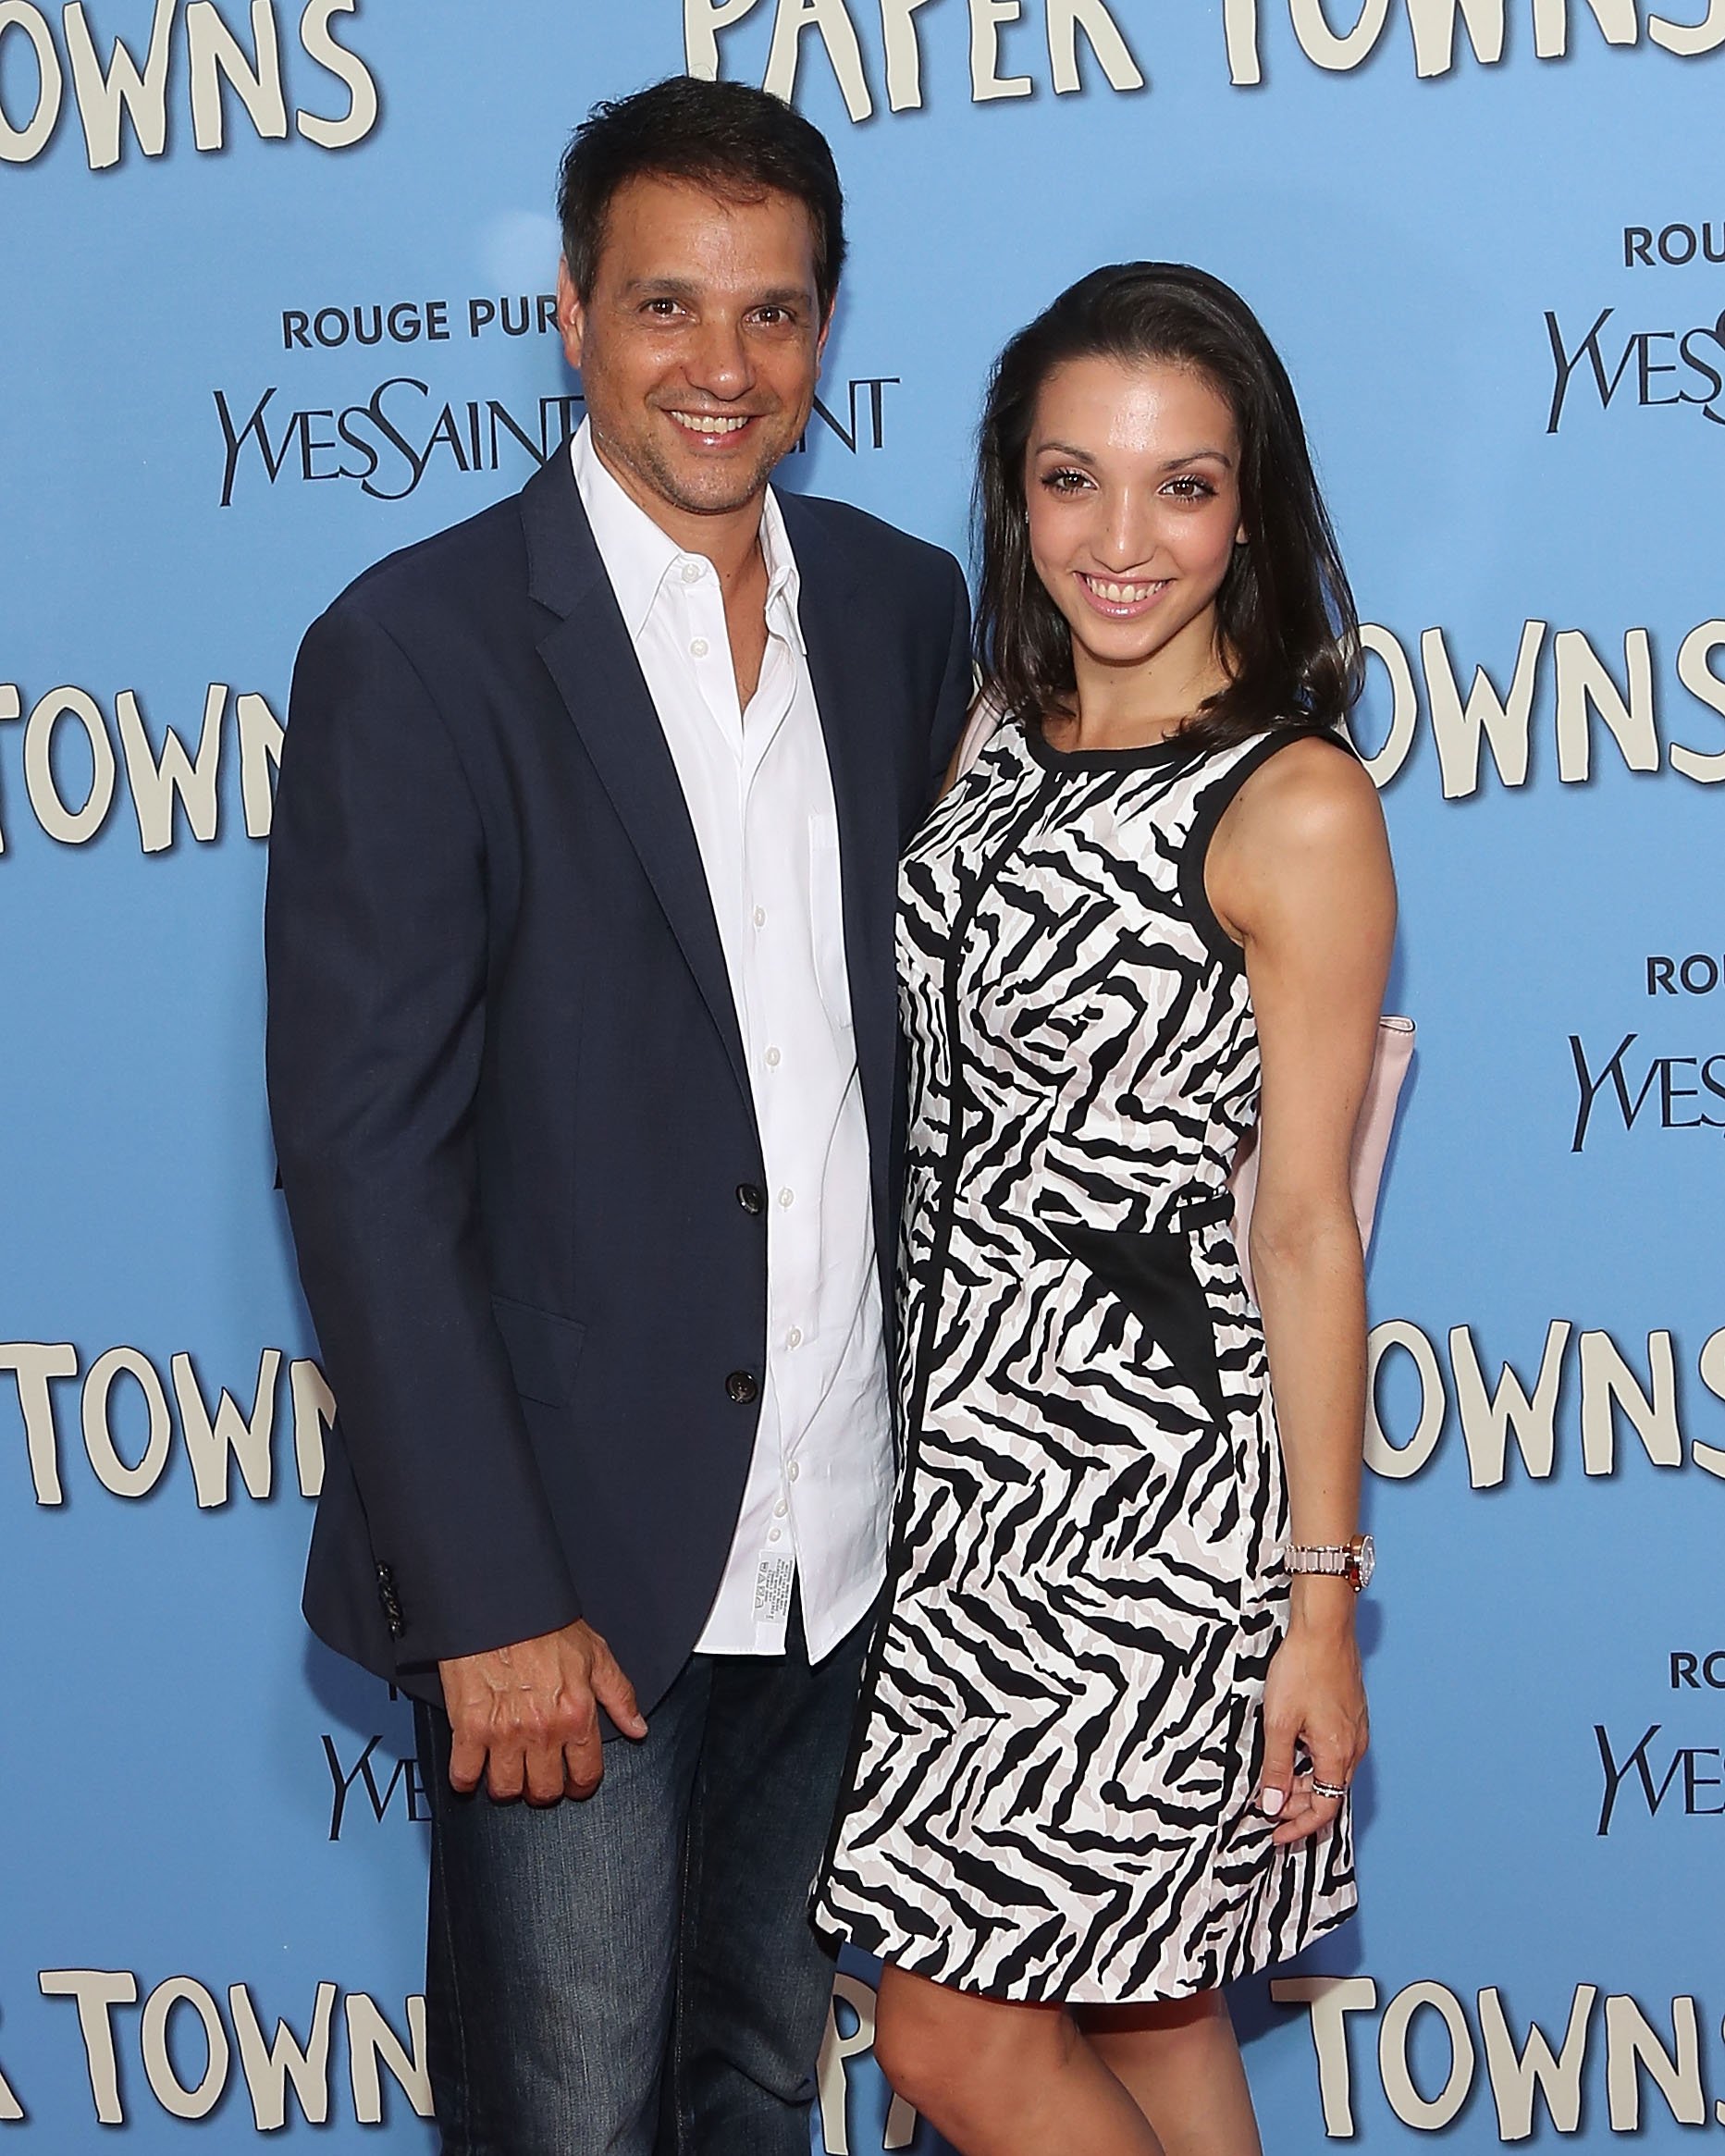 Ralph Macchio and Julia Macchio at the New York premiere of "Paper Towns" on July 21, 2015 | Source: Getty Images